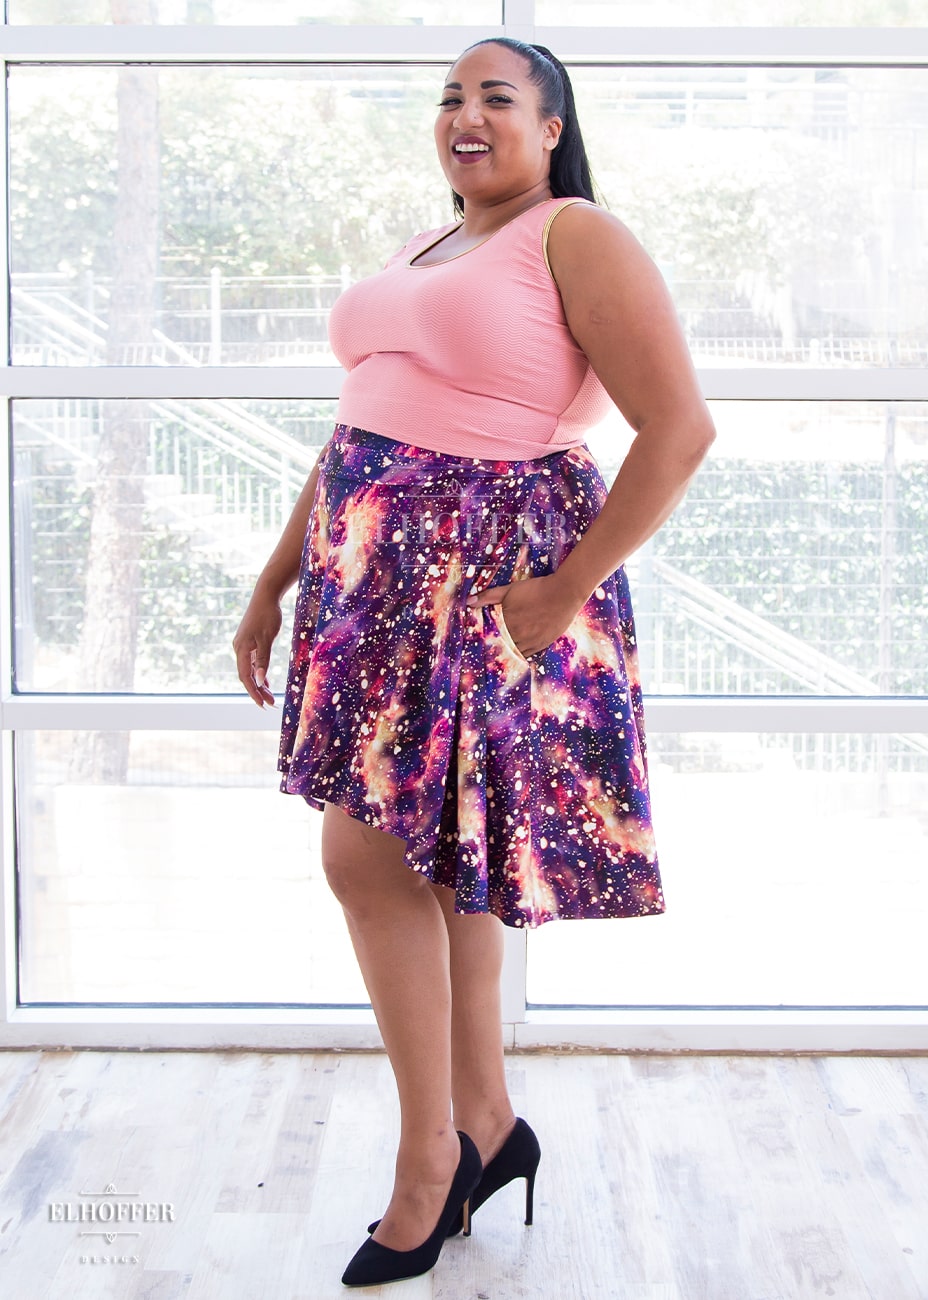 Tas, a medium dark skinned 2XL model with long dark hair, is wearing a high low skirt that hits the back of her knees with a two inch elastic covered waistband. The skirt is our bleach galaxy print. The Bleach Galaxy print is a red, purple, and pink printed galaxy pattern with light yellow splotches that appear like the fabric has been bleached all over.